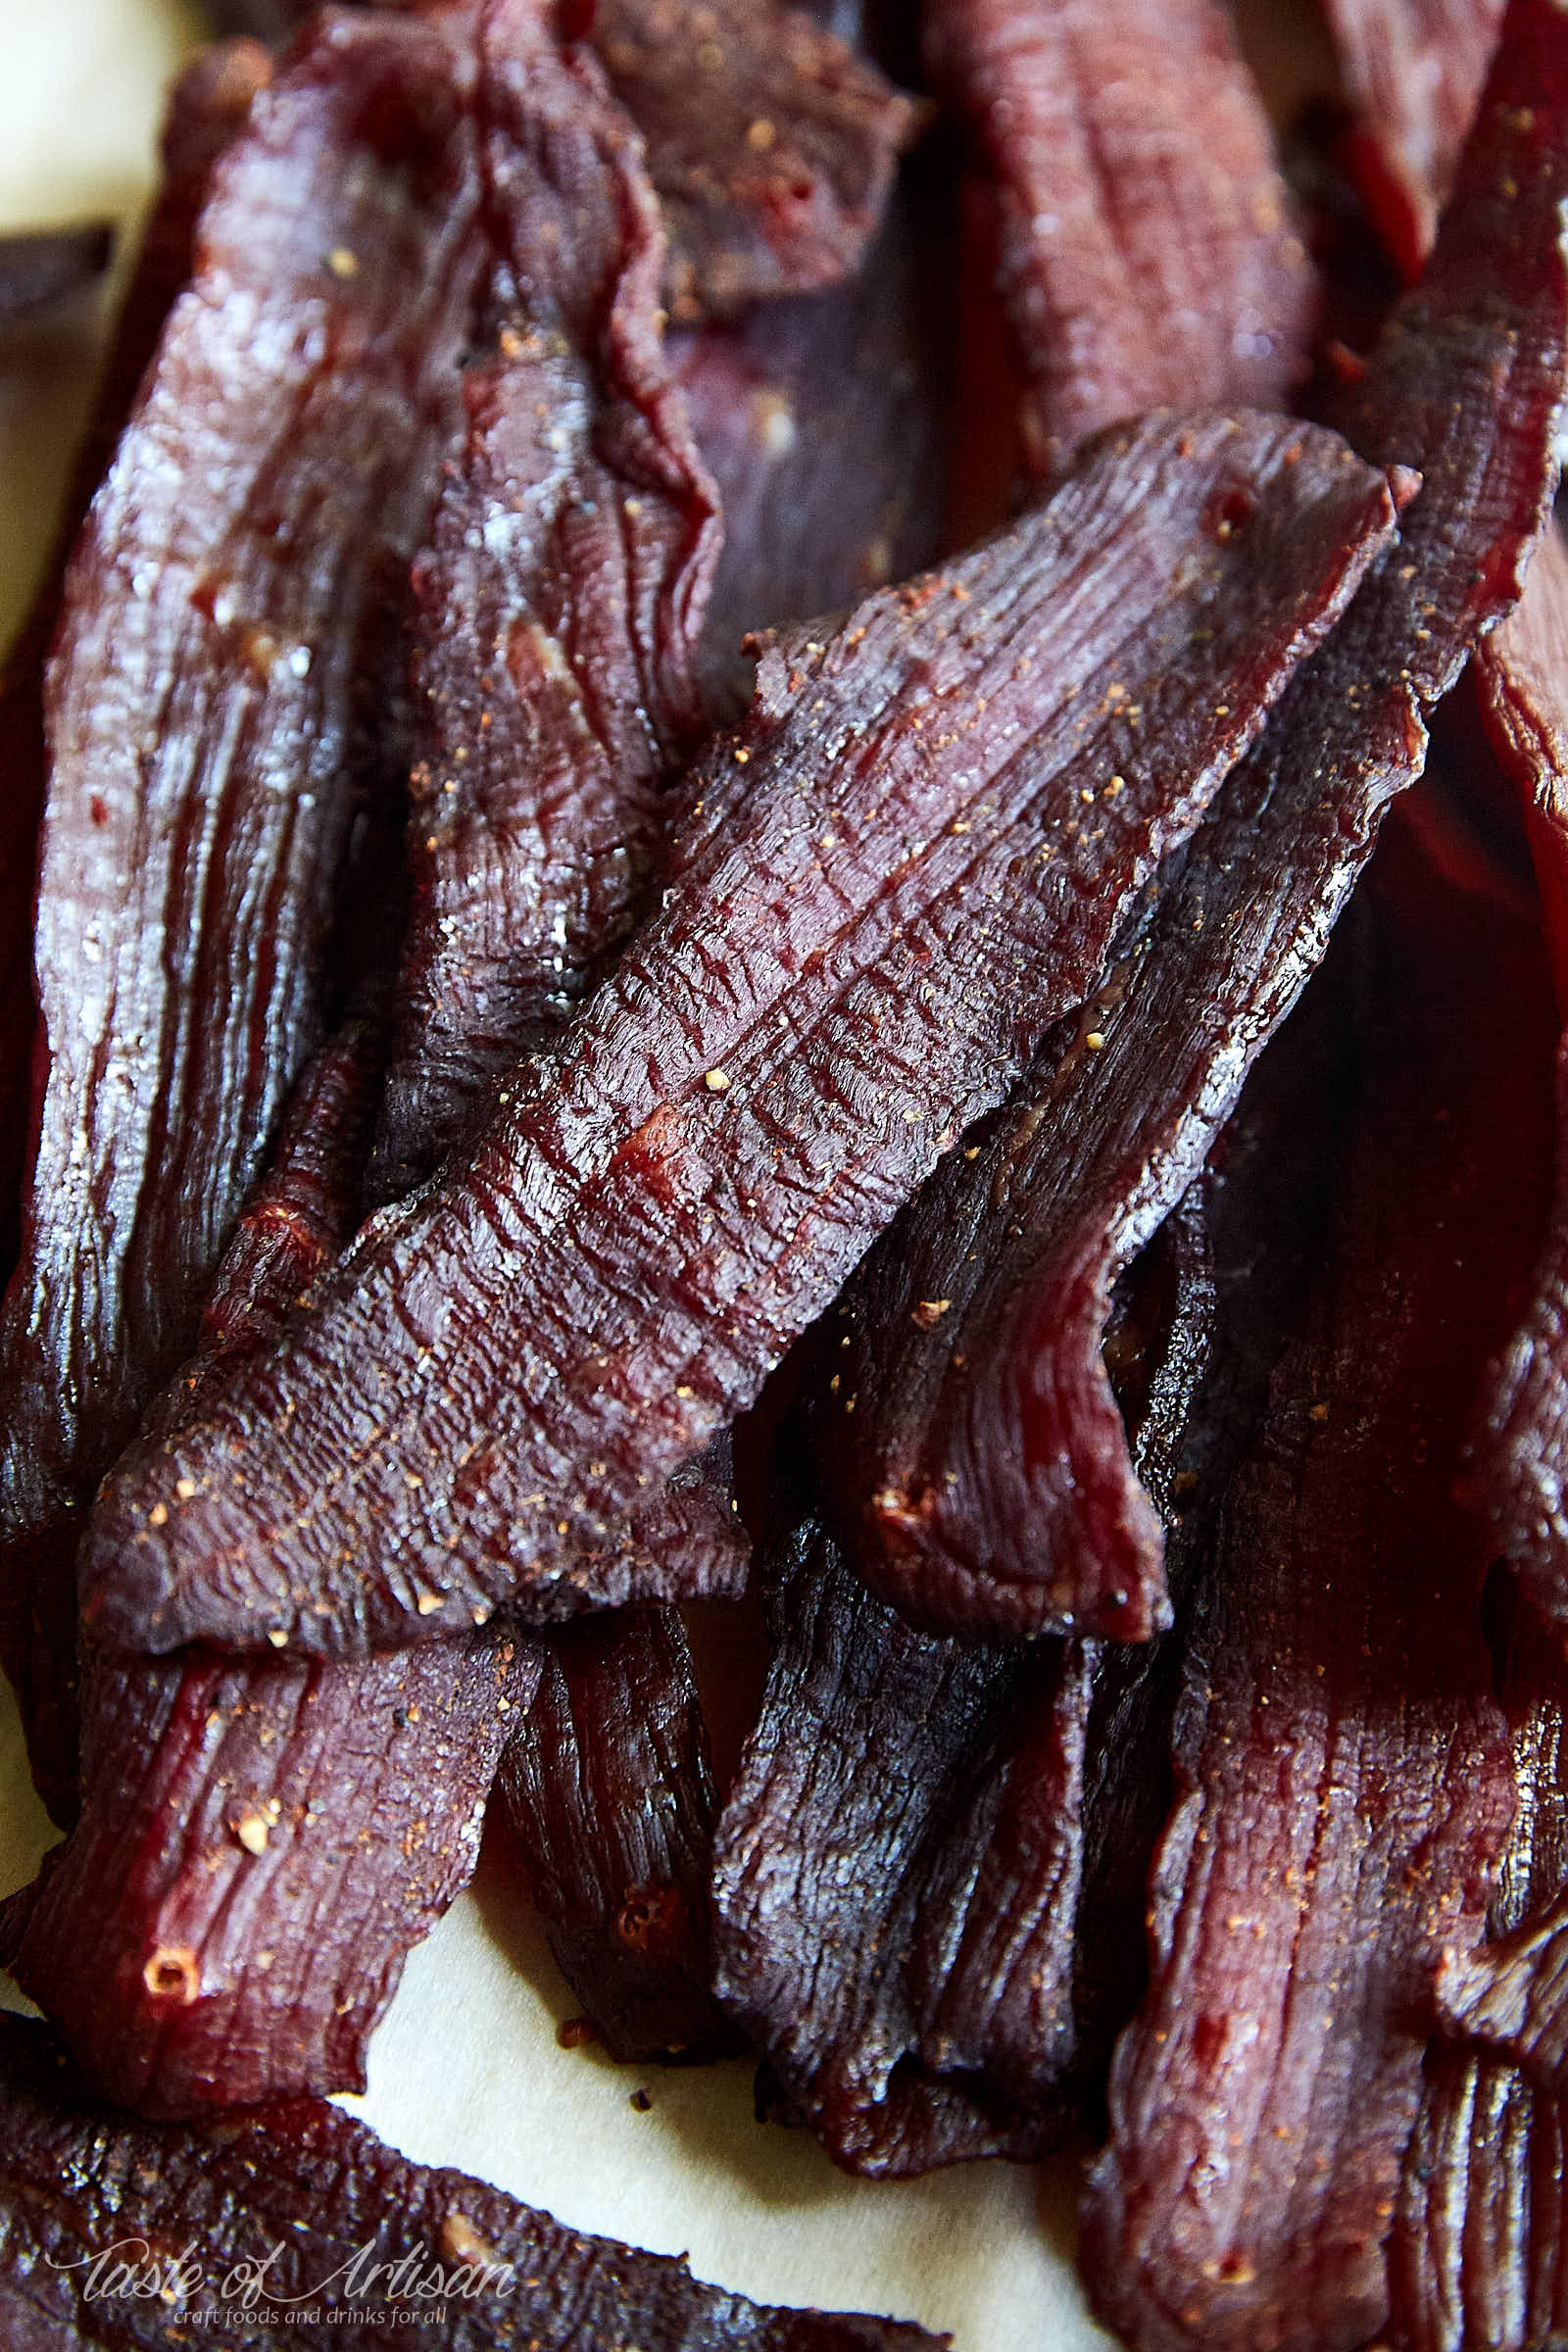 Making Jerky In The Oven With Ground Beef
 How to Make Beef Jerky in the Oven Taste of Artisan